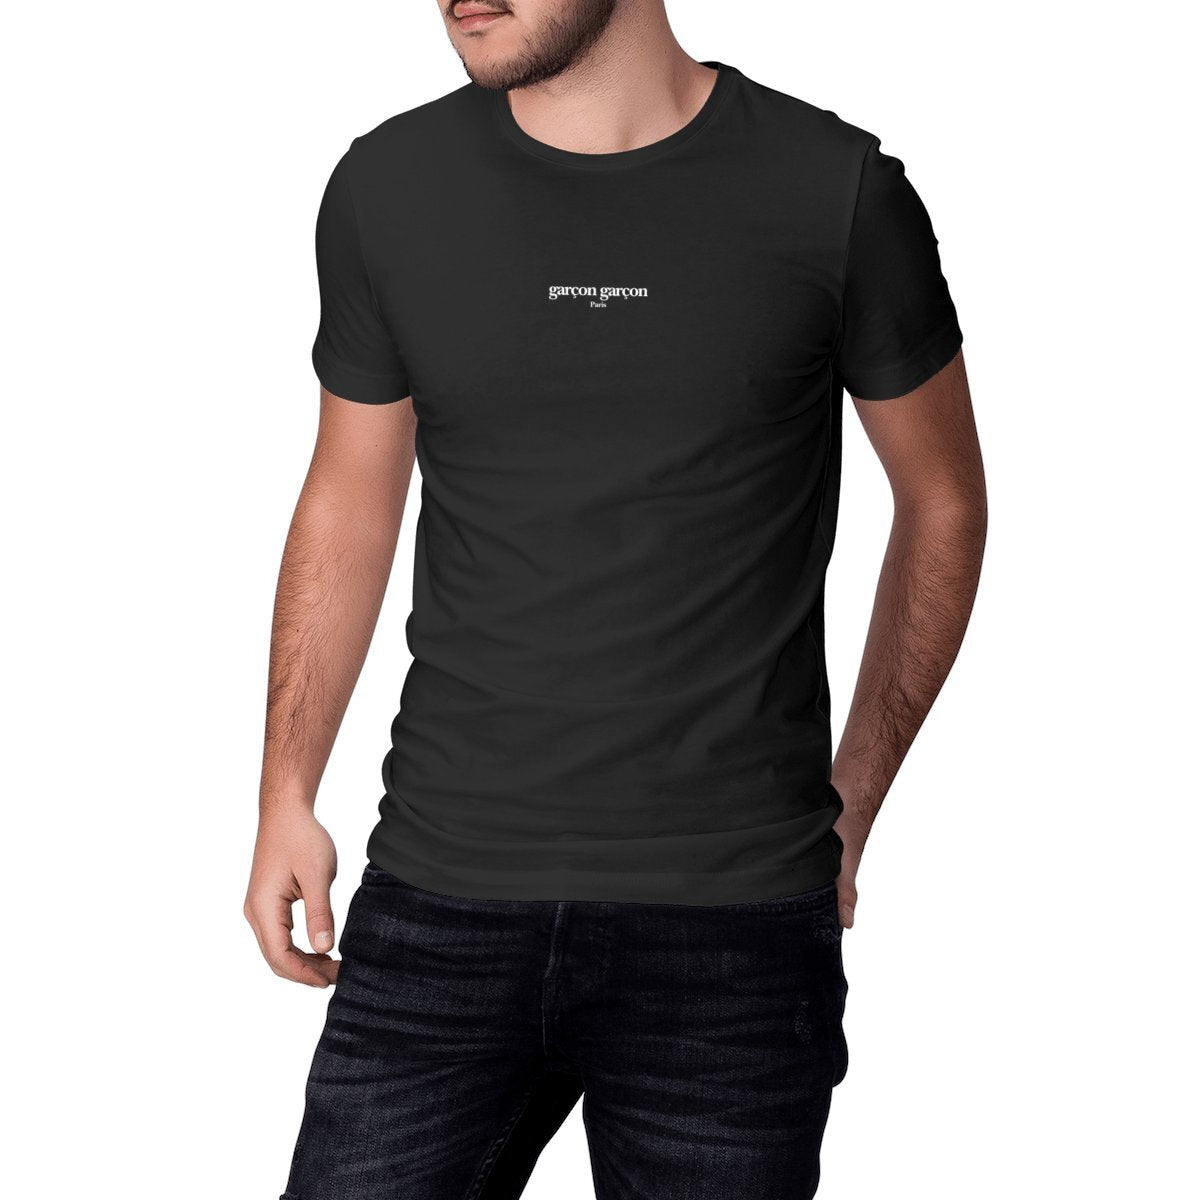 garçon garçon essentiel tee black. Dive into the essence of Parisian cool with this regular sized tee. The subtle 'garçon garçon' signature whispers a chic narrative, offering a slice of the city's famed elegance. Perfect for those who speak style with simplicity.